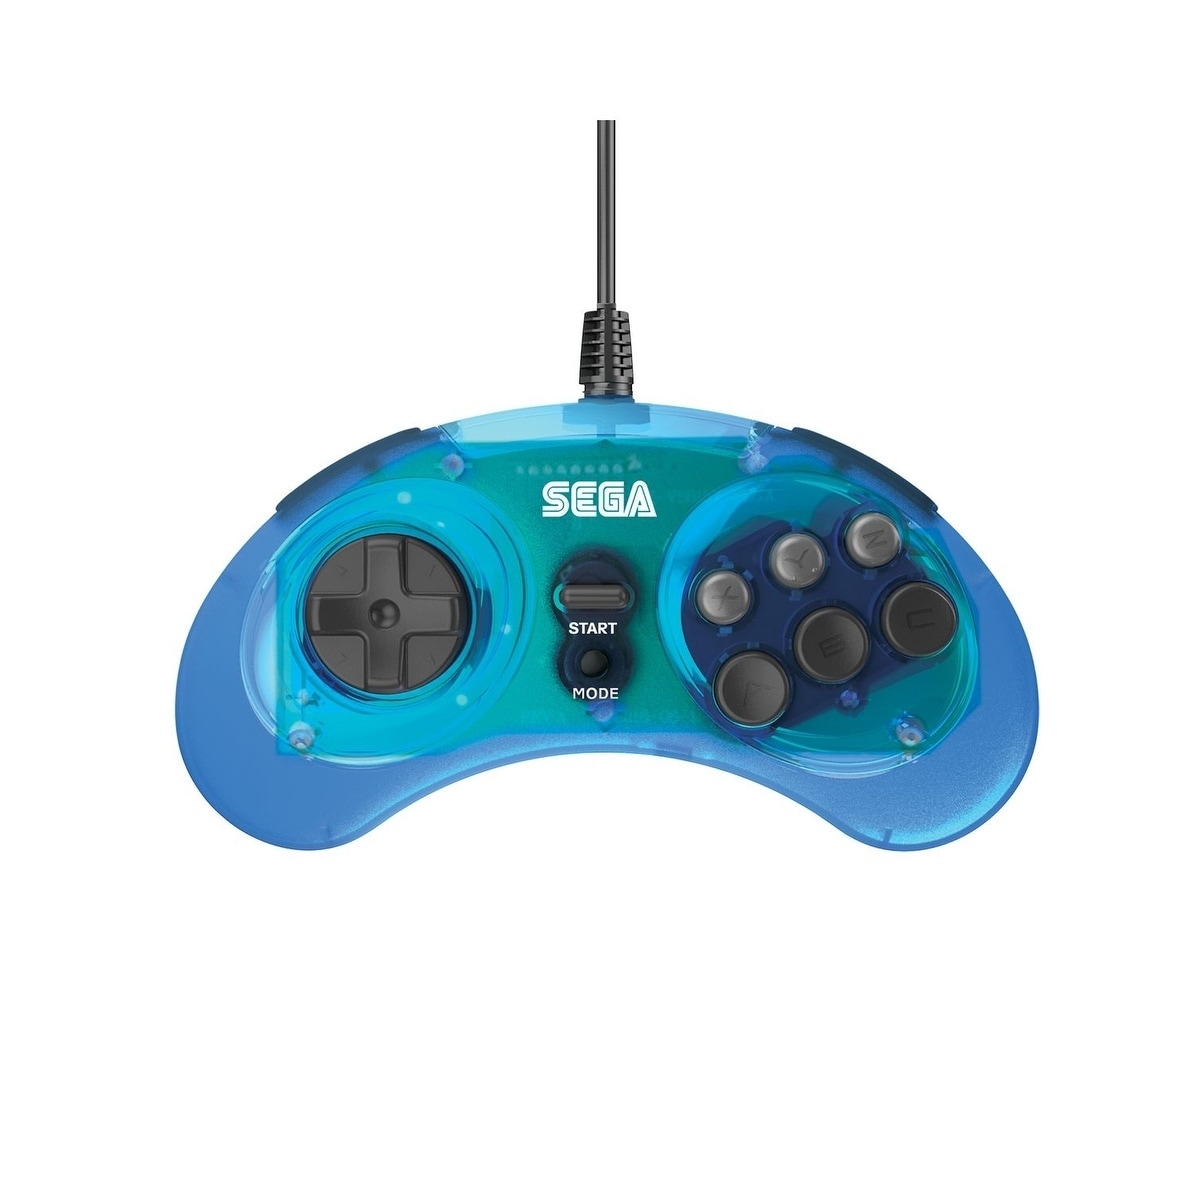 Shop Retro Bit Official Sega Genesis Controller Classic 8 Button Arcade Pad With Usb Port For Pc Mac Steam Clear Blue Clear Blue Overstock 1 Pack